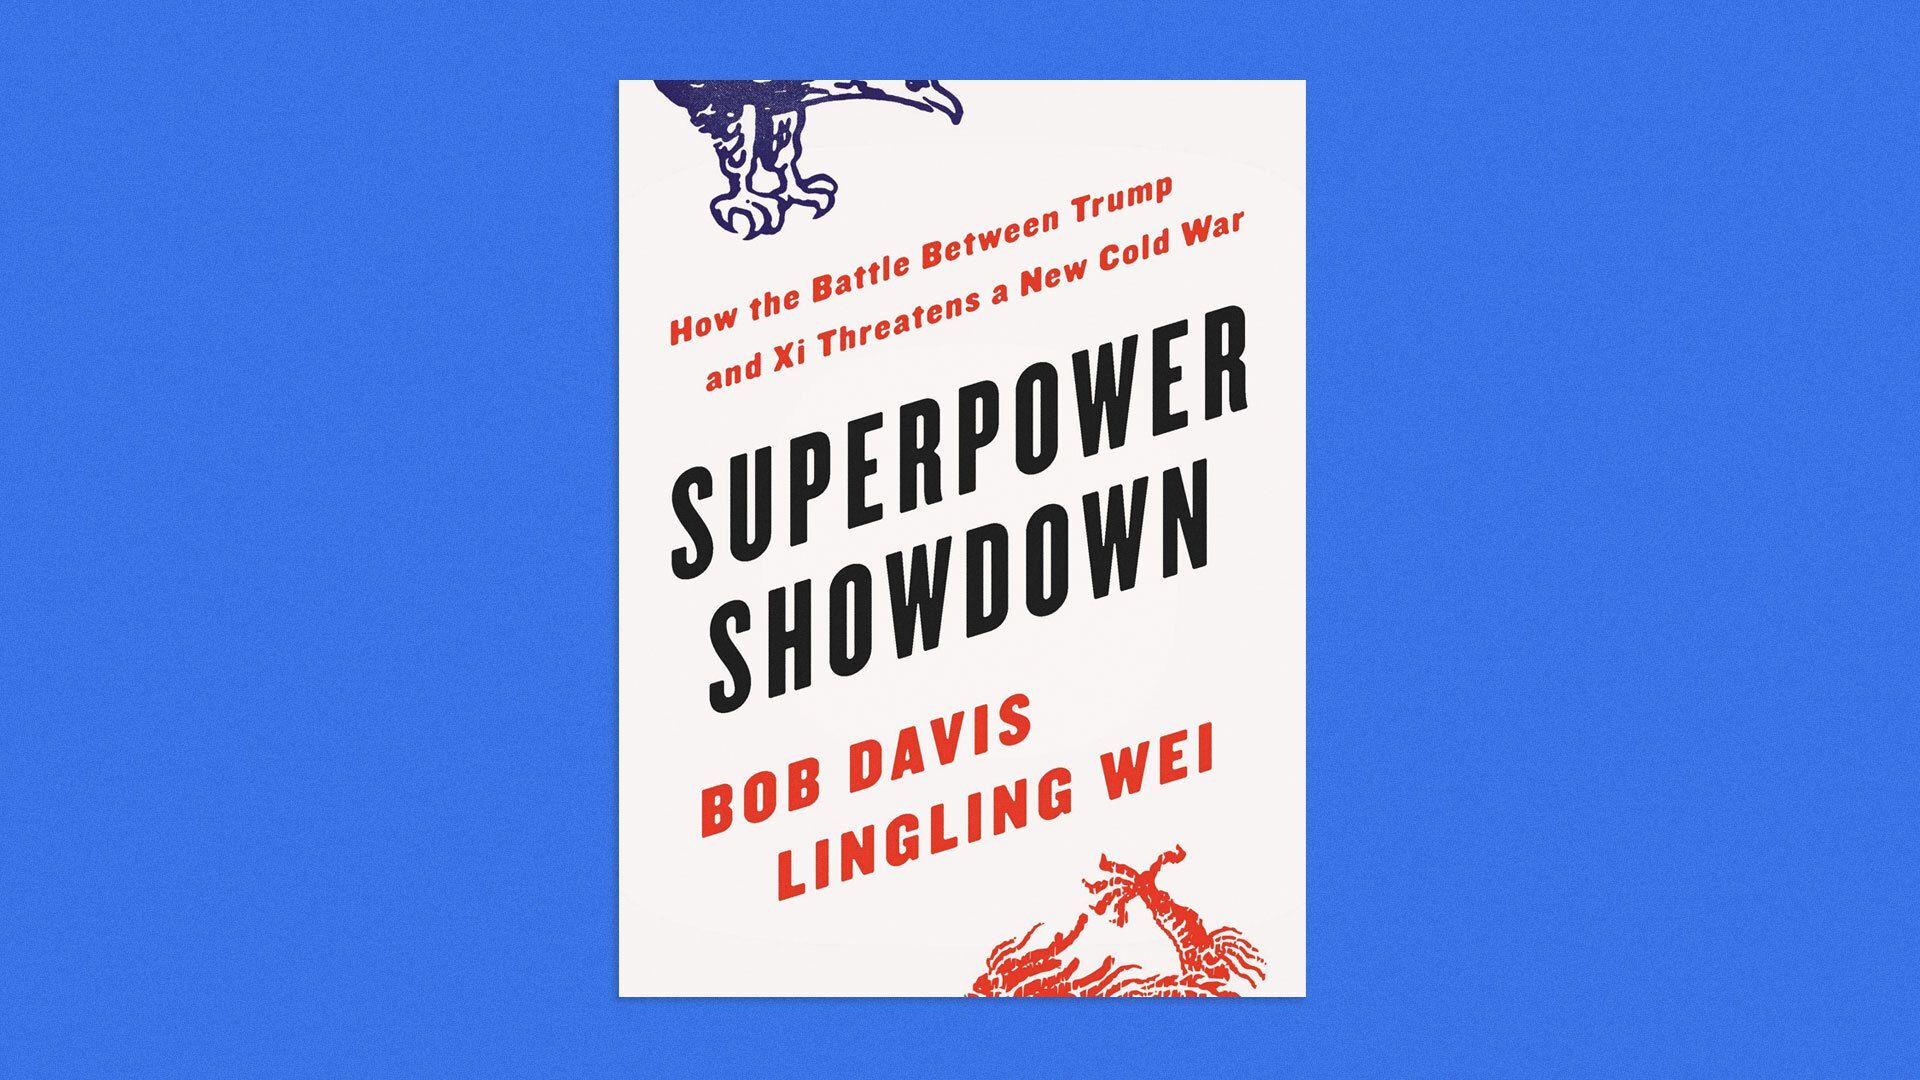 Book cover of  "Superpower Showdown: How the Battle Between Trump and Xi Threatens a New Cold War" (HarperCollins, June 2020), by Wall Street Journal reporting duo Bob Davis and Lingling Wei